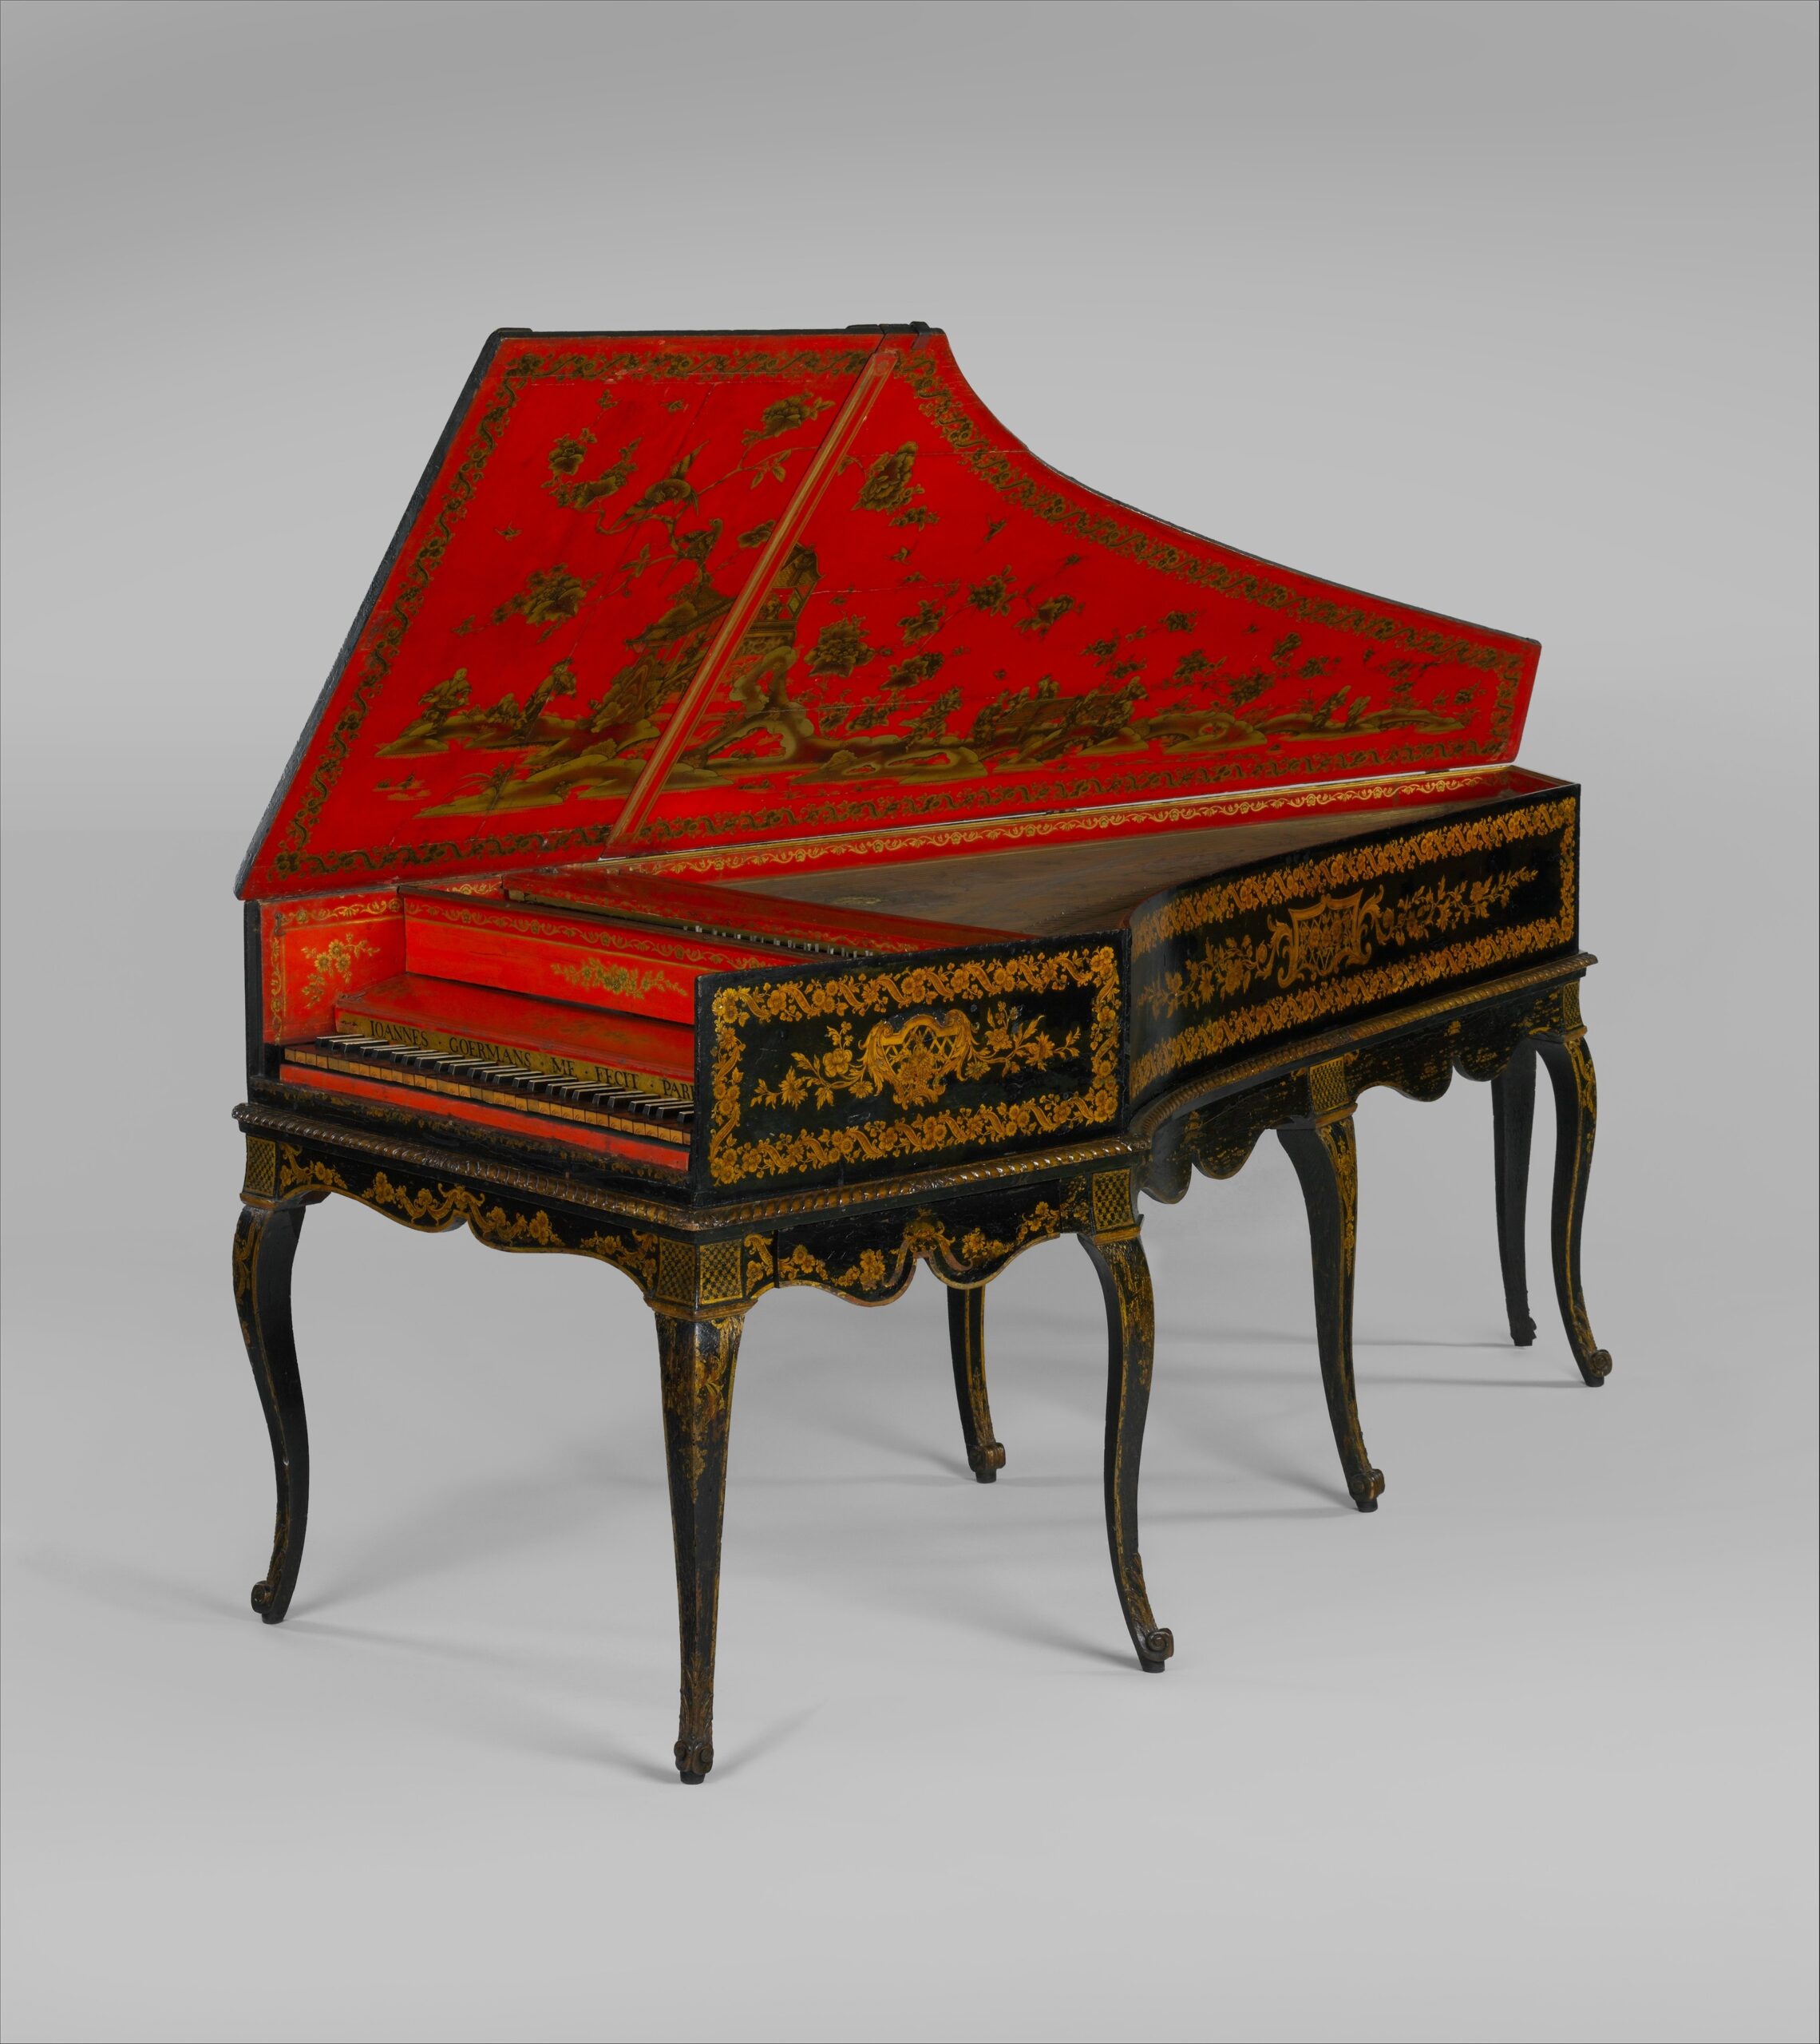 The Hapsichord - who invented piano